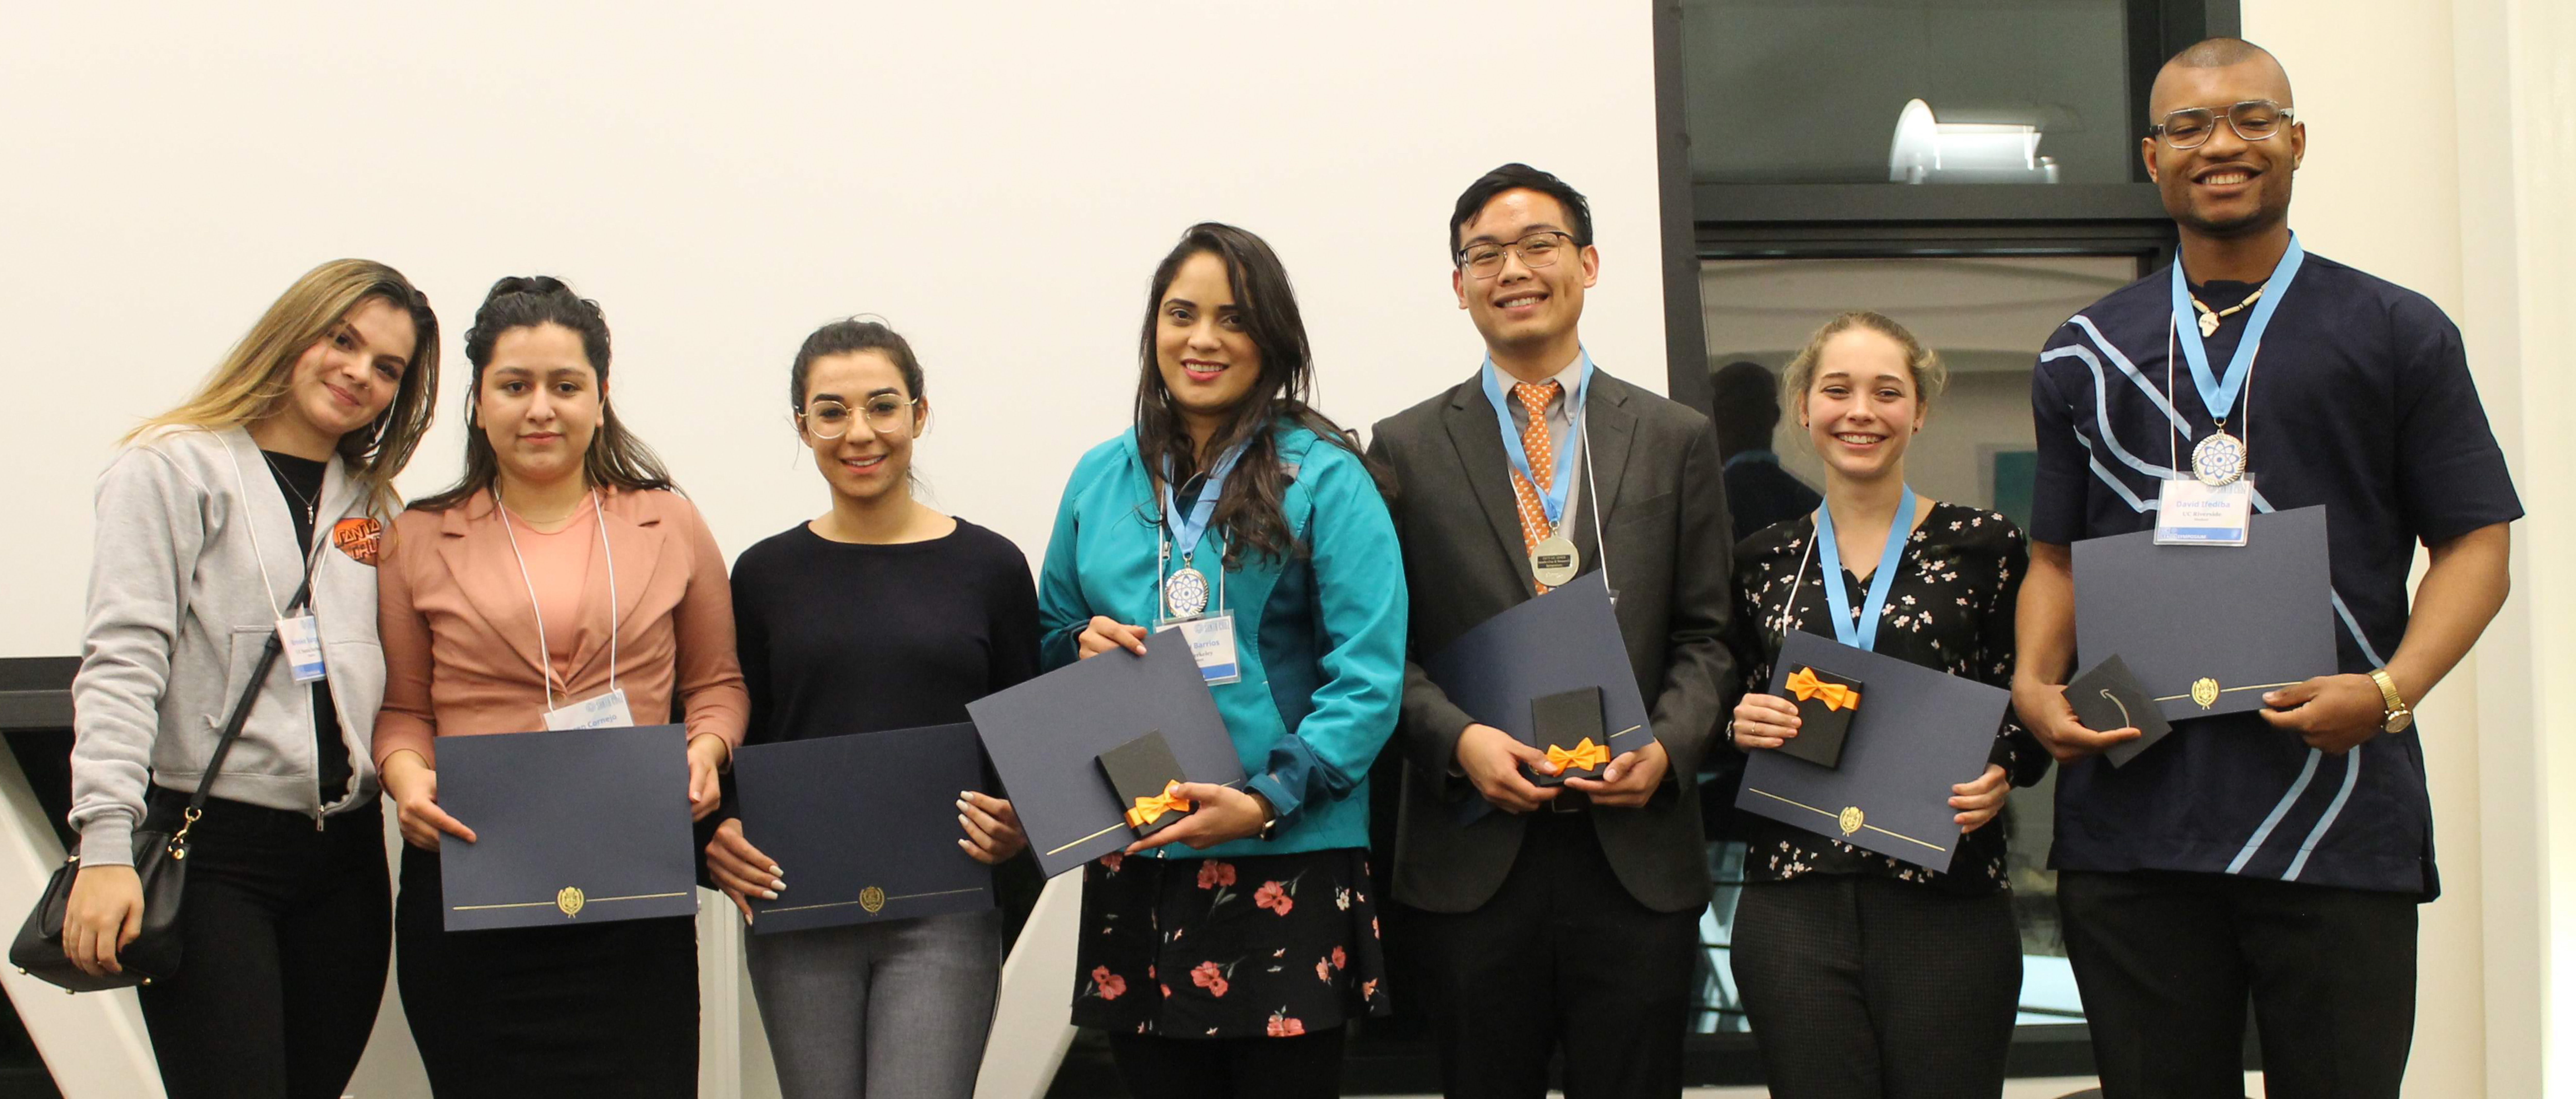 Poster award presentations at the 2019 UC LEADS Symposium at UCSC